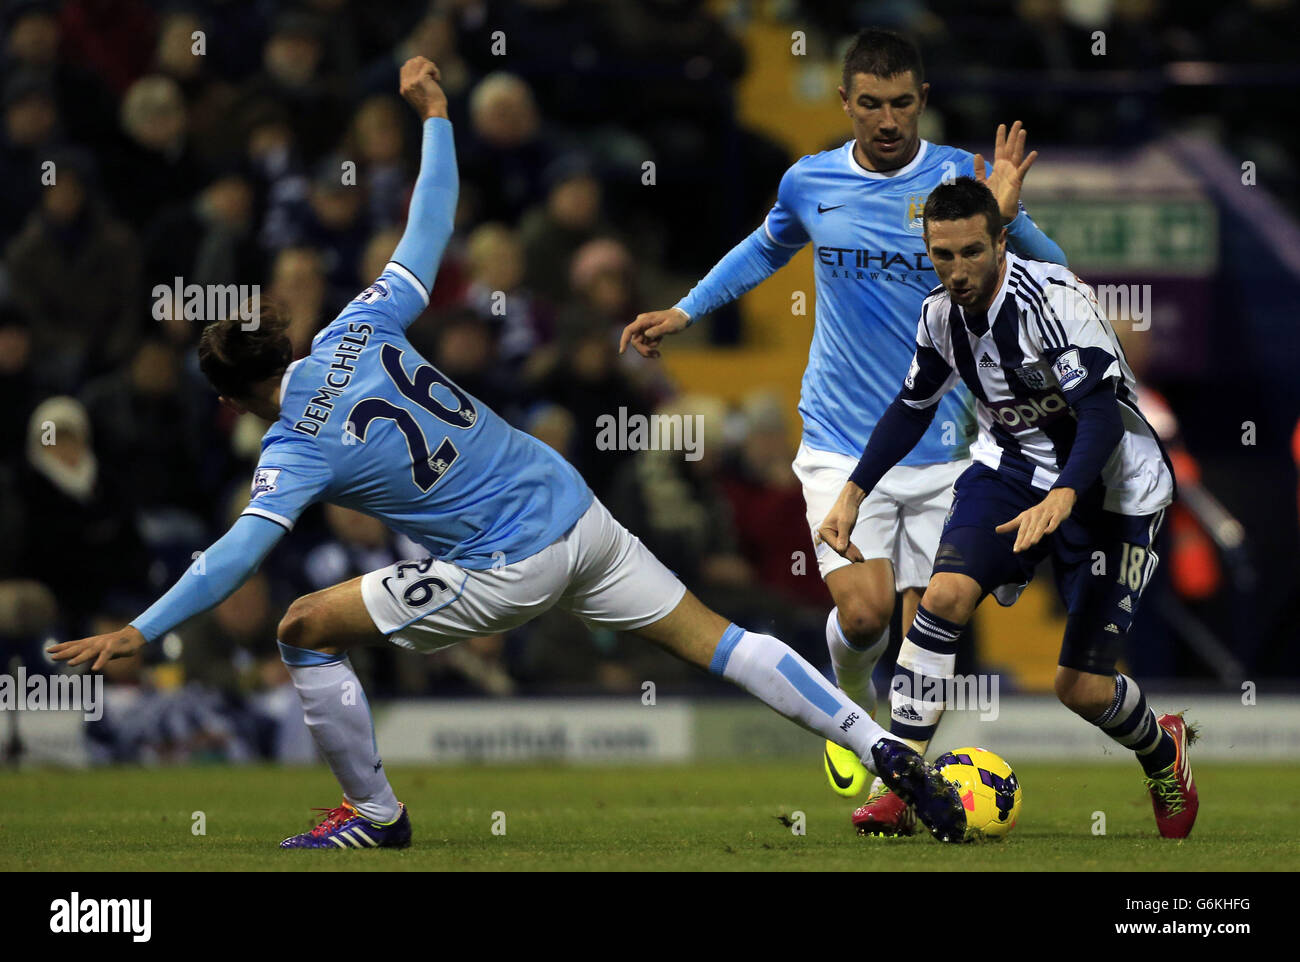 West Bromwich Albion's Morgan Amalfitano takes on Manchester City pair Martin Demichelis and Aleksandar Kolarovduring the Barclays Premier League match at The Hawthorns, West Bromwich. Stock Photo